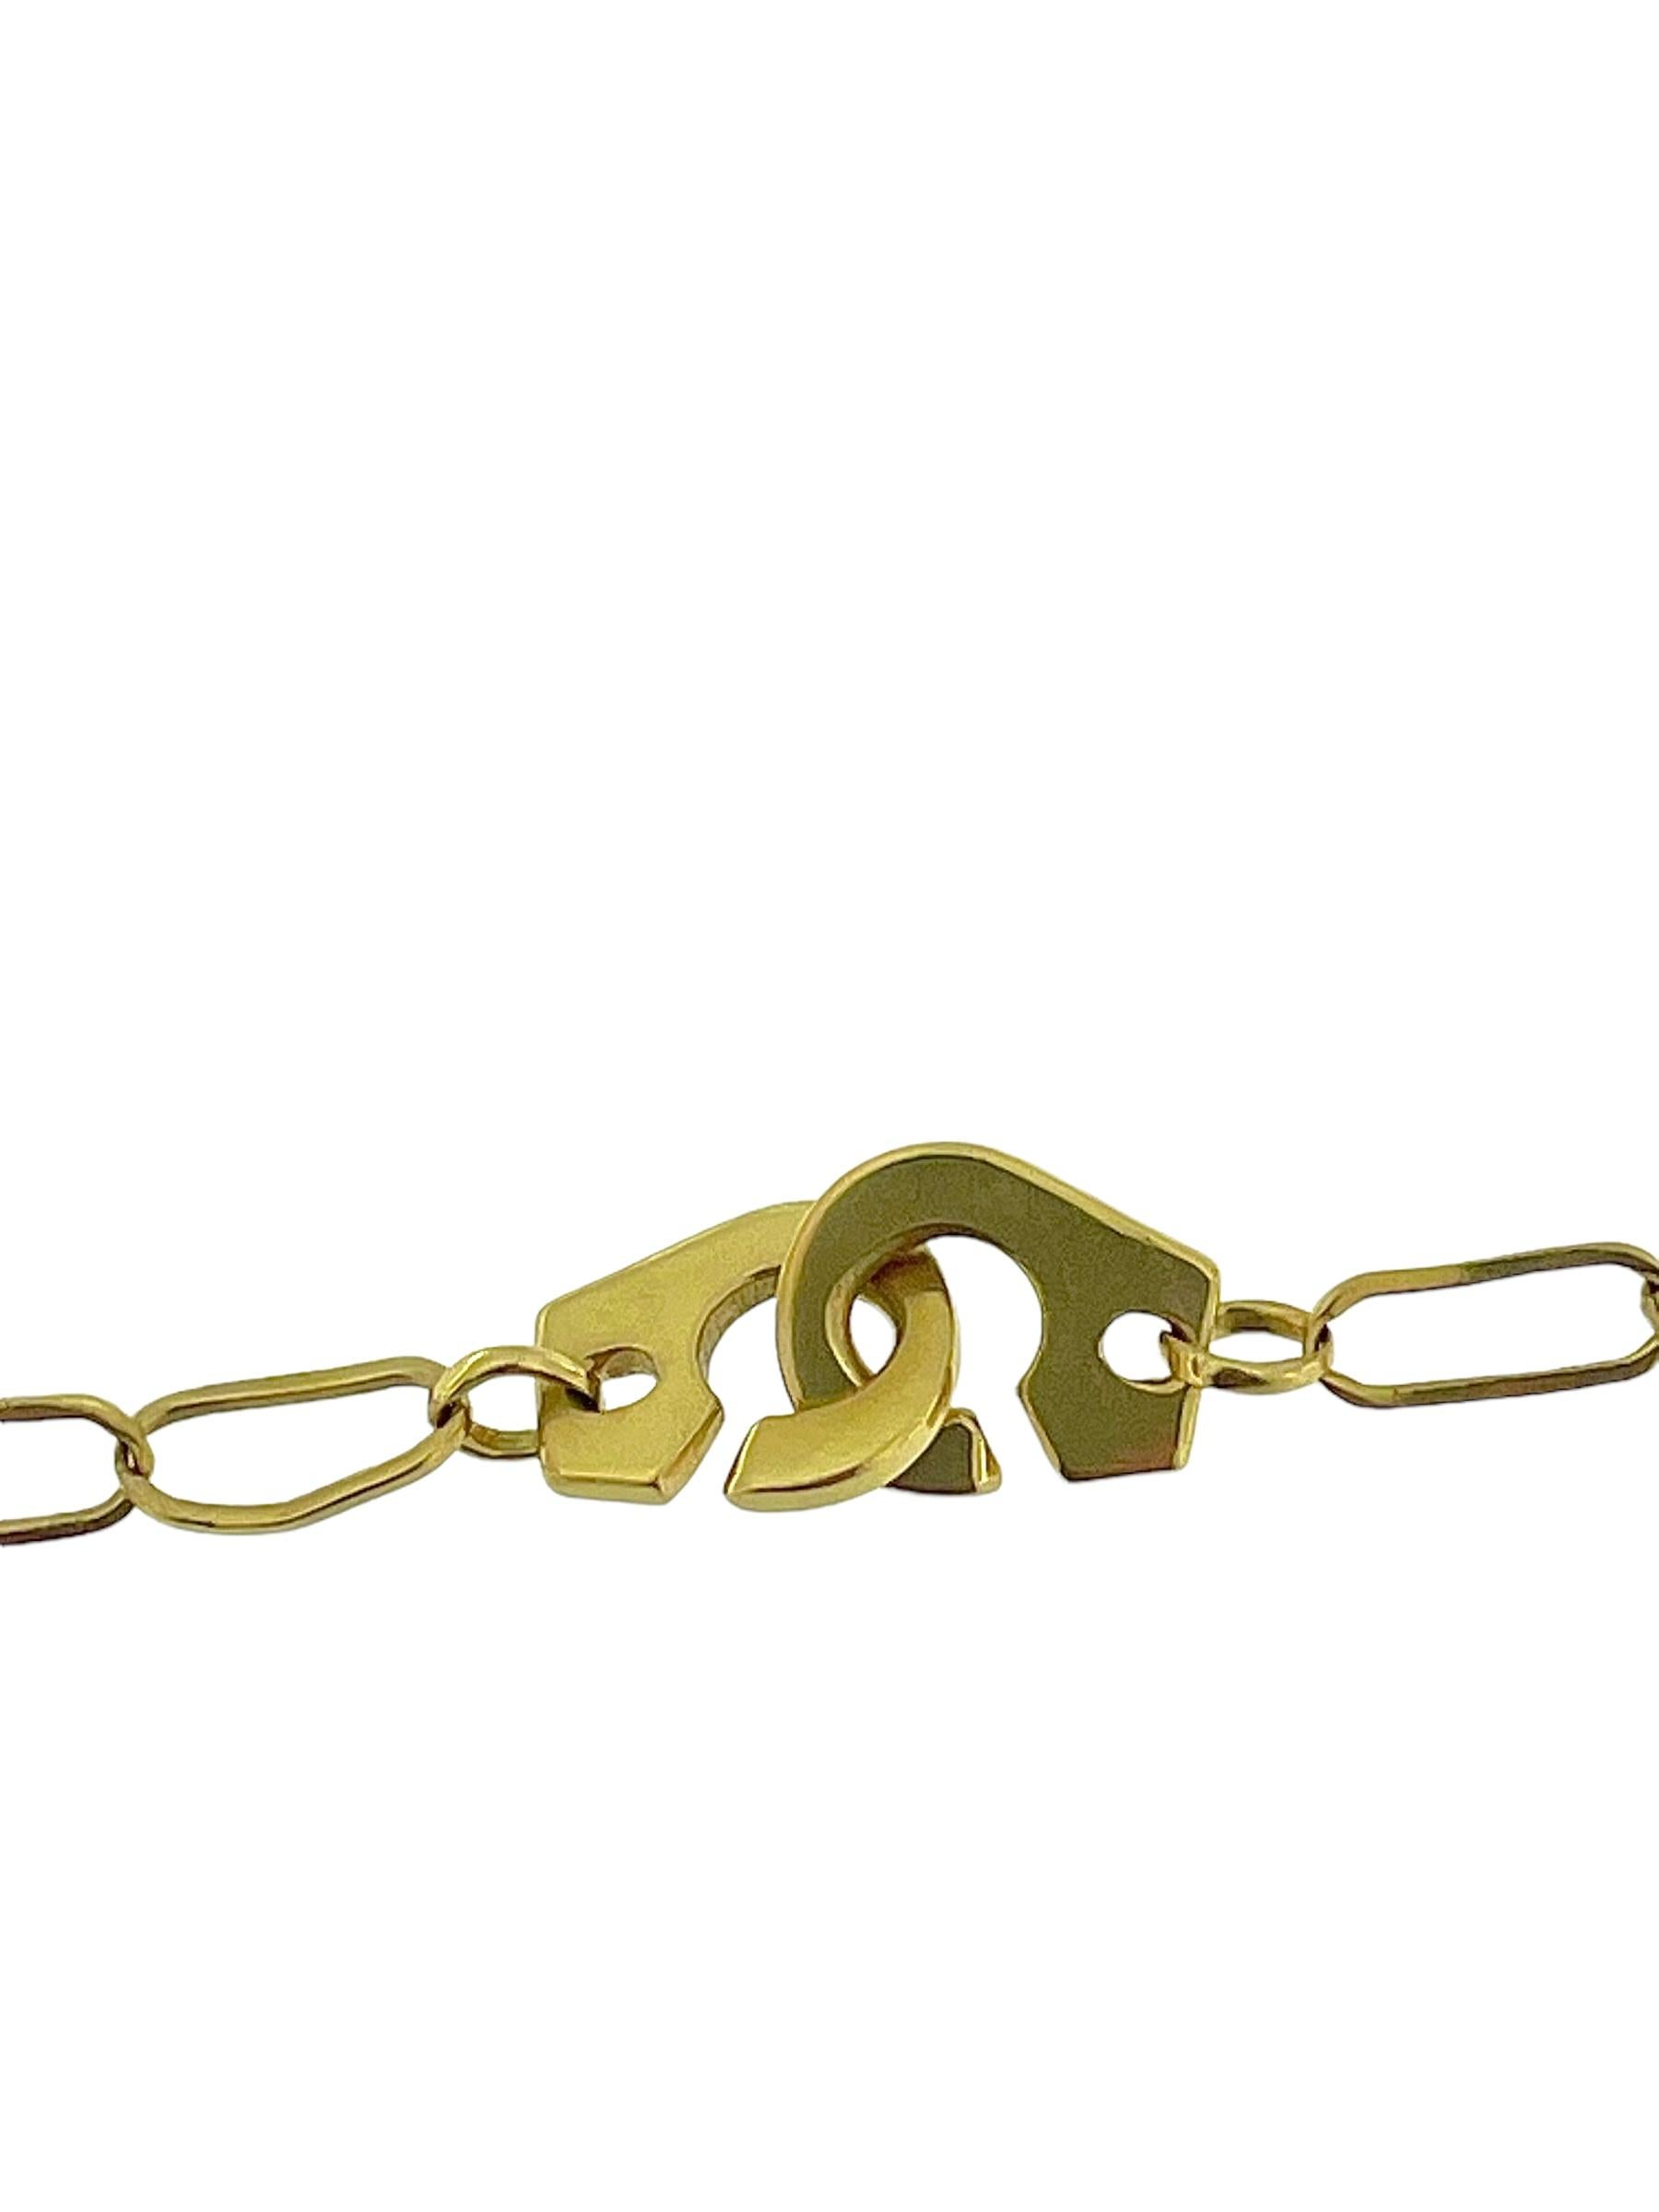 The Italian Yellow Gold Link Necklace by Chimento is a bold and stylish piece of jewelry that combines Italian craftsmanship with contemporary design. Crafted from 18-karat yellow gold, this necklace features a unique handcuff-inspired pendant